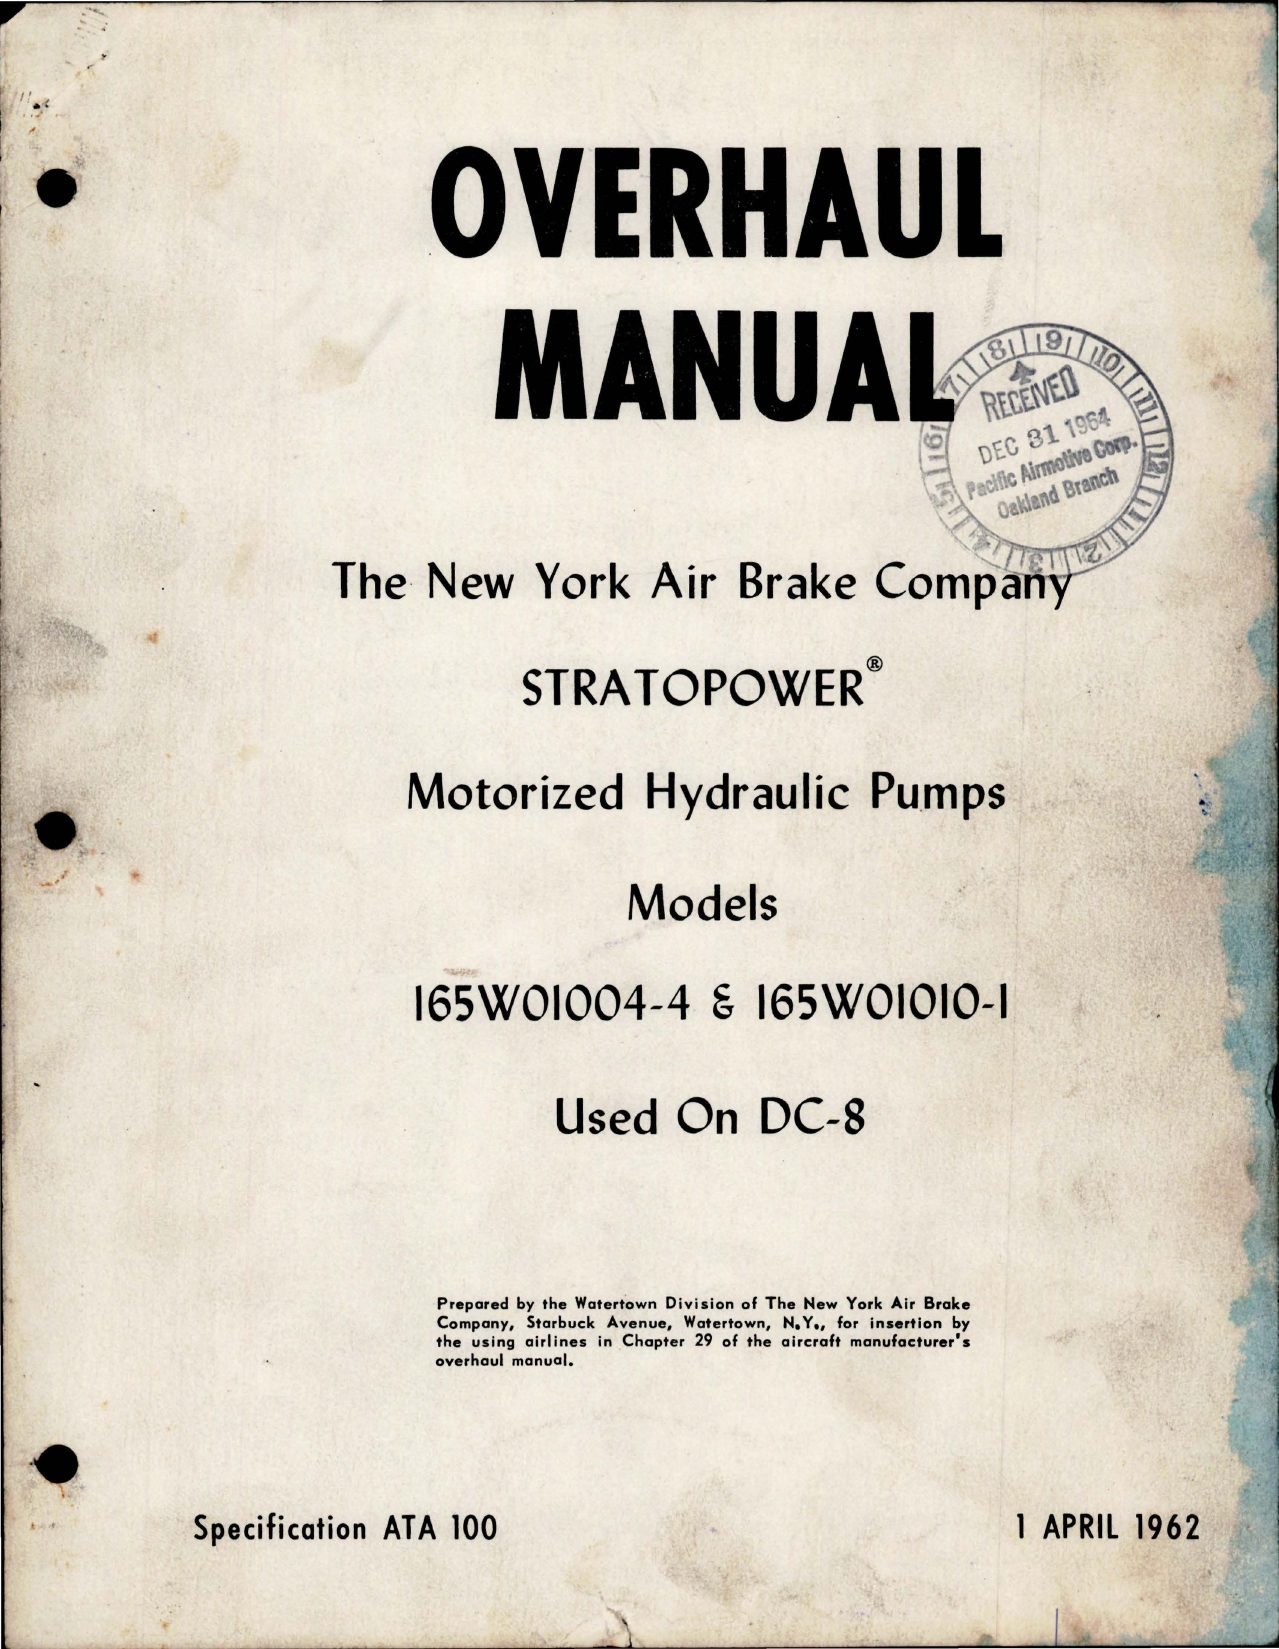 Sample page 1 from AirCorps Library document: Overhaul Manual for Stratopower Motorized Hydraulic Pumps - Models 165W01004-4 and 165W01010-1 